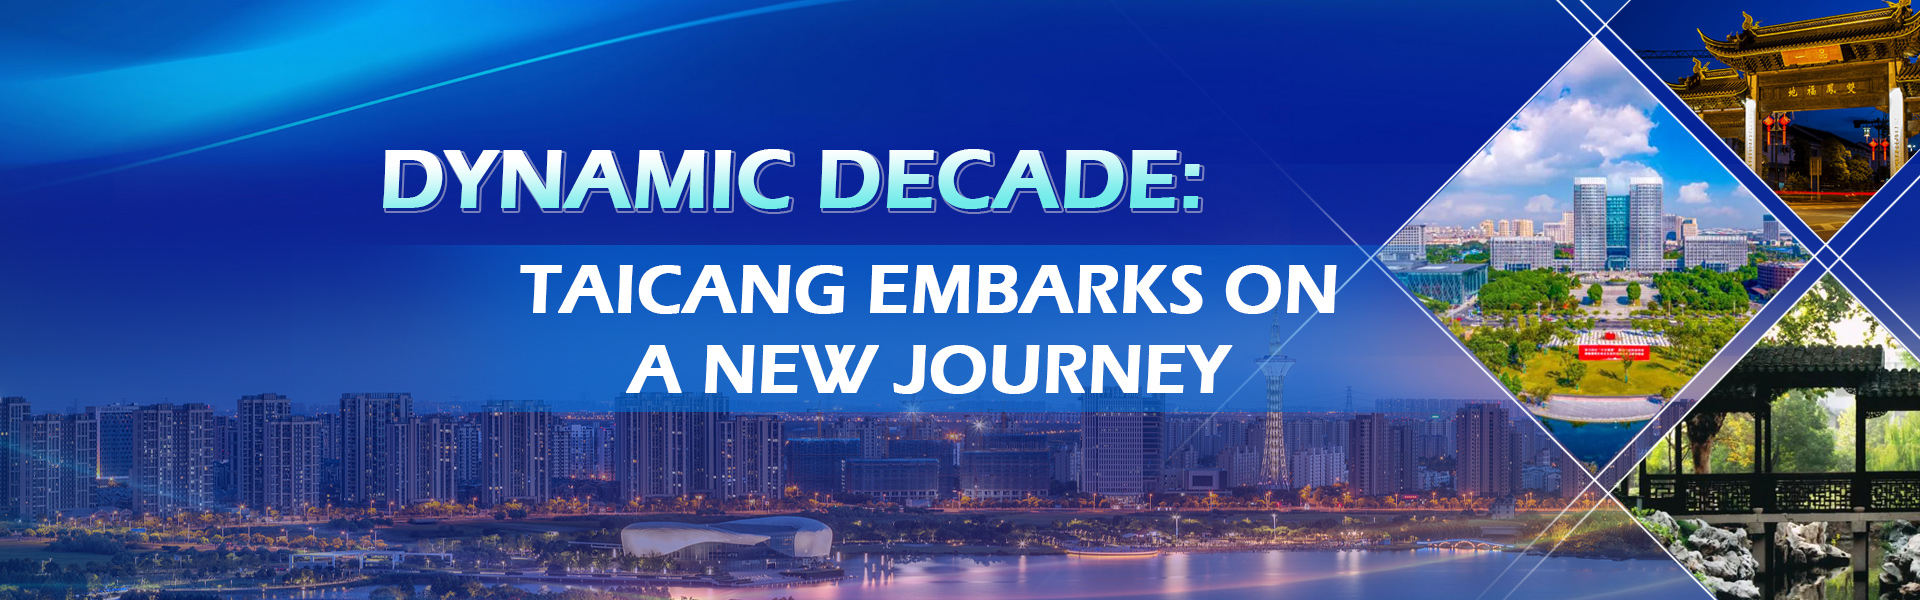 Dynamic decade: Taicang embarks on on a new journey